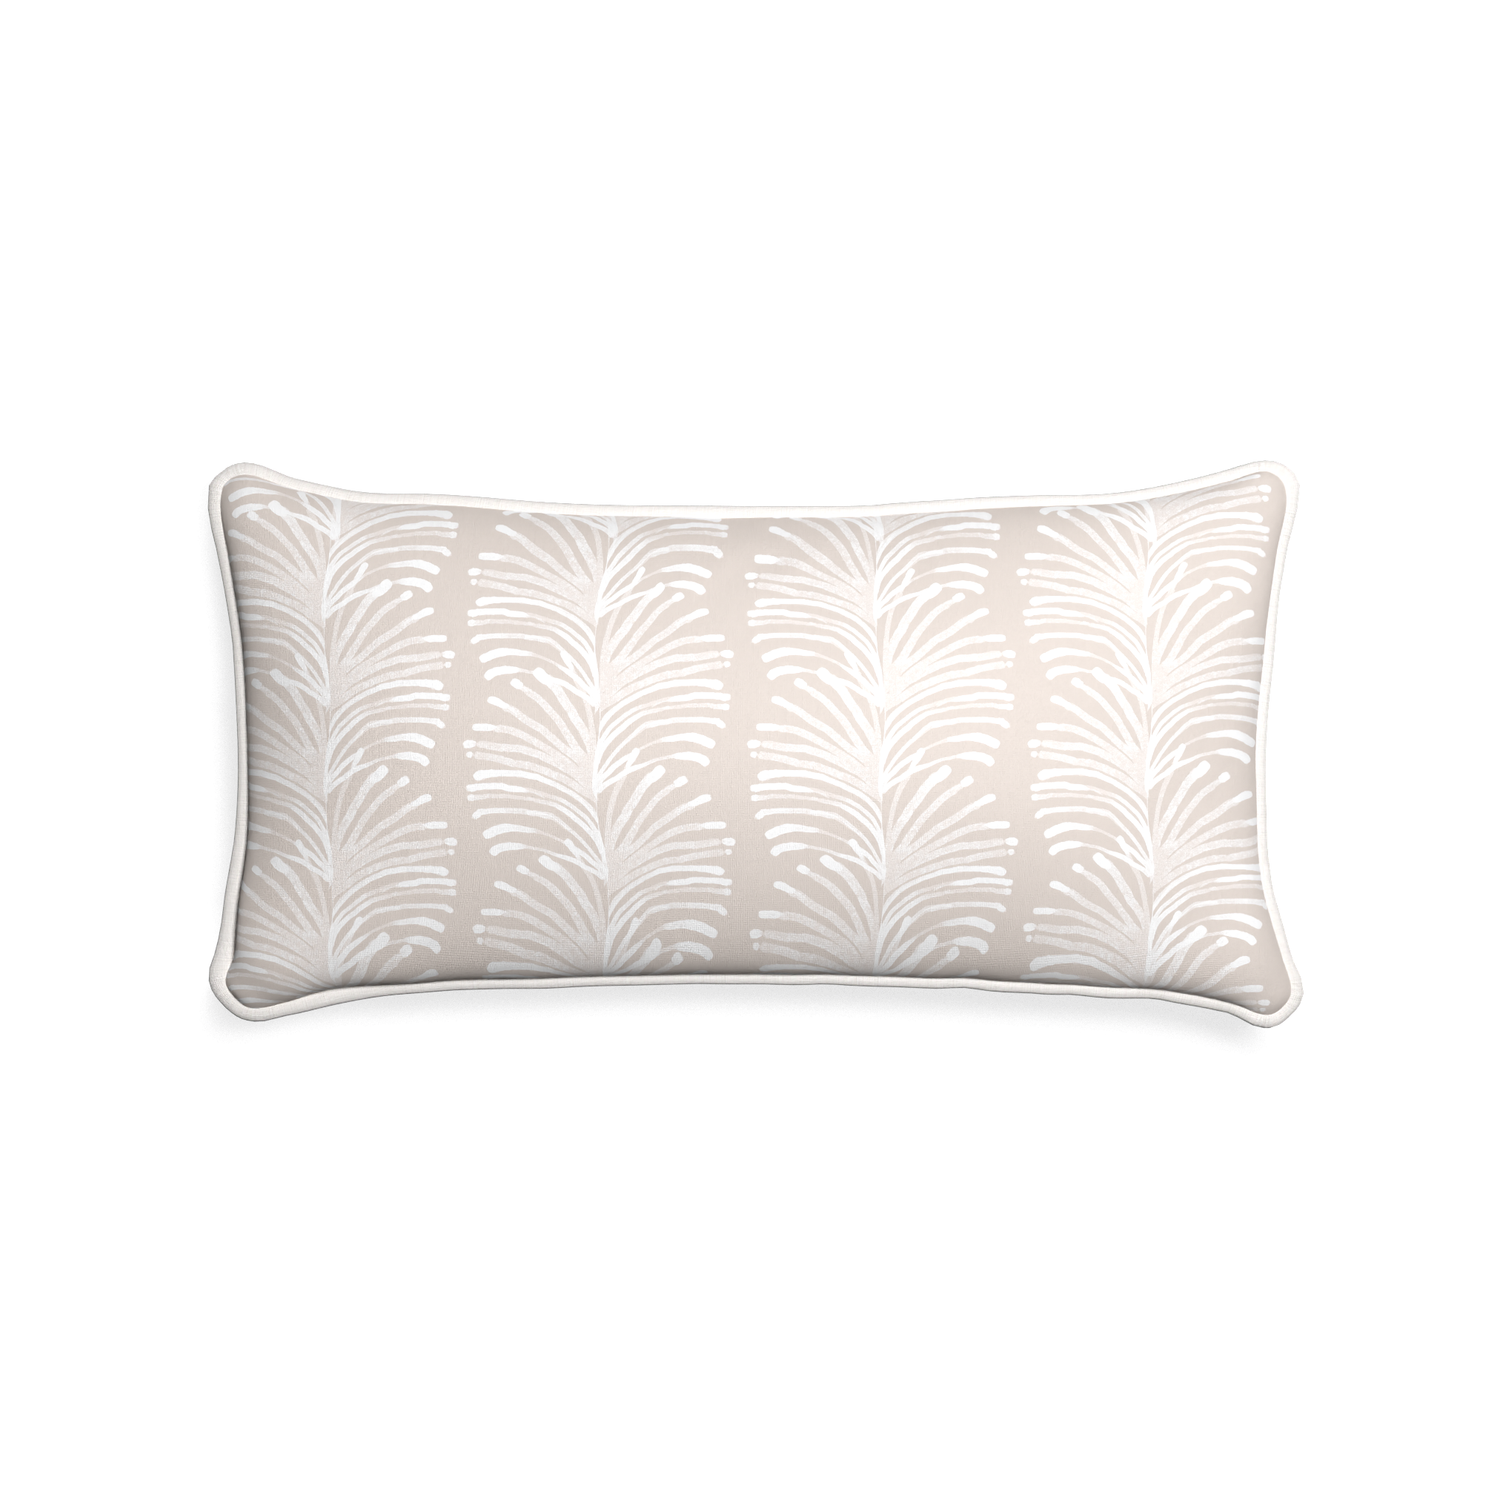 Midi-lumbar emma sand custom sand colored botanical stripepillow with snow piping on white background